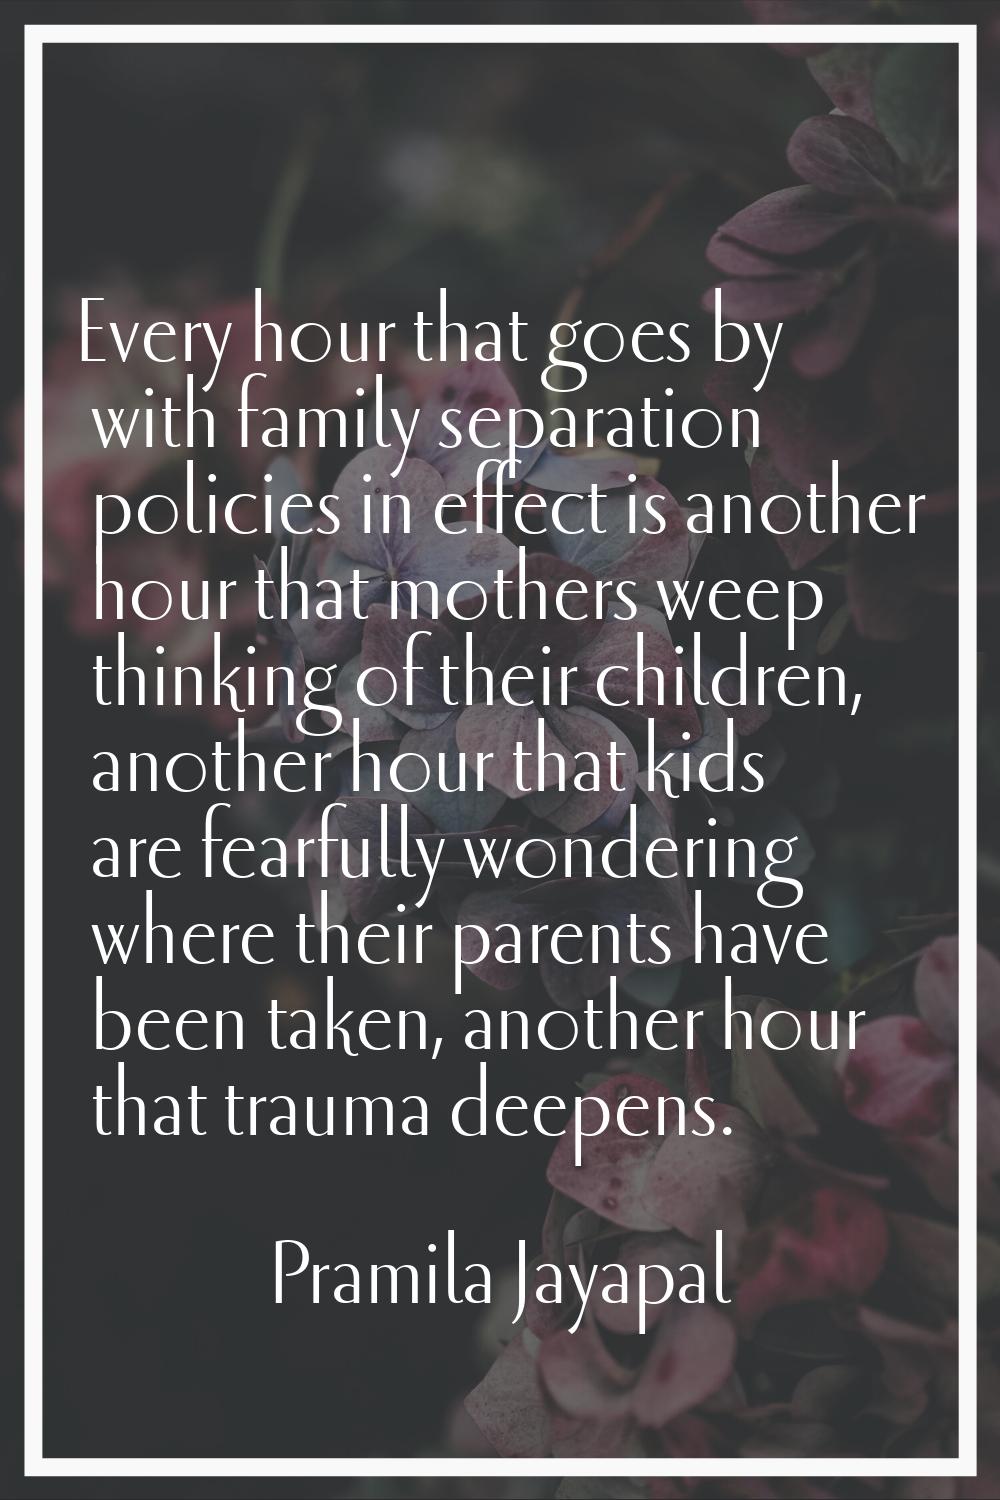 Every hour that goes by with family separation policies in effect is another hour that mothers weep